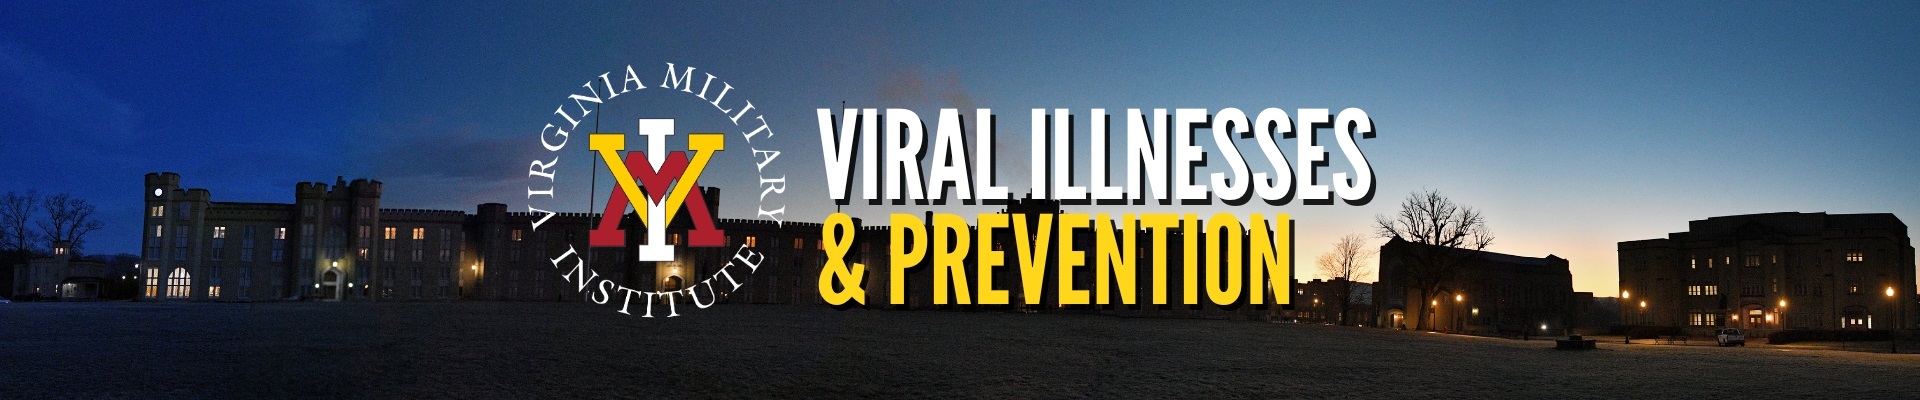 Night photo of barracks with text VMI Viral Illnesses and Prevention